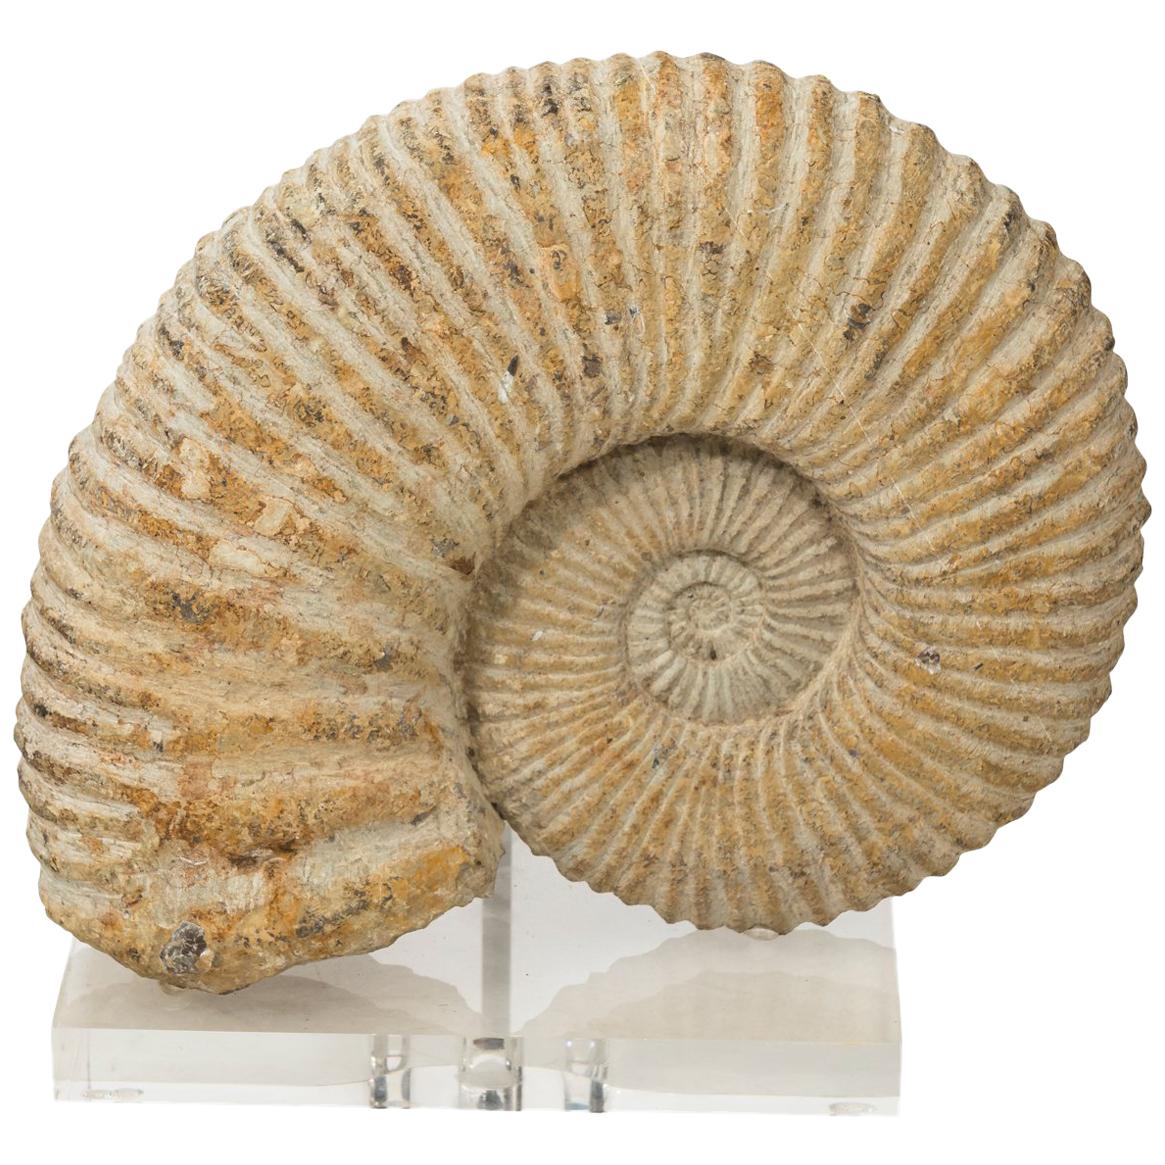 Contemporary Display of Nautilus Fossil